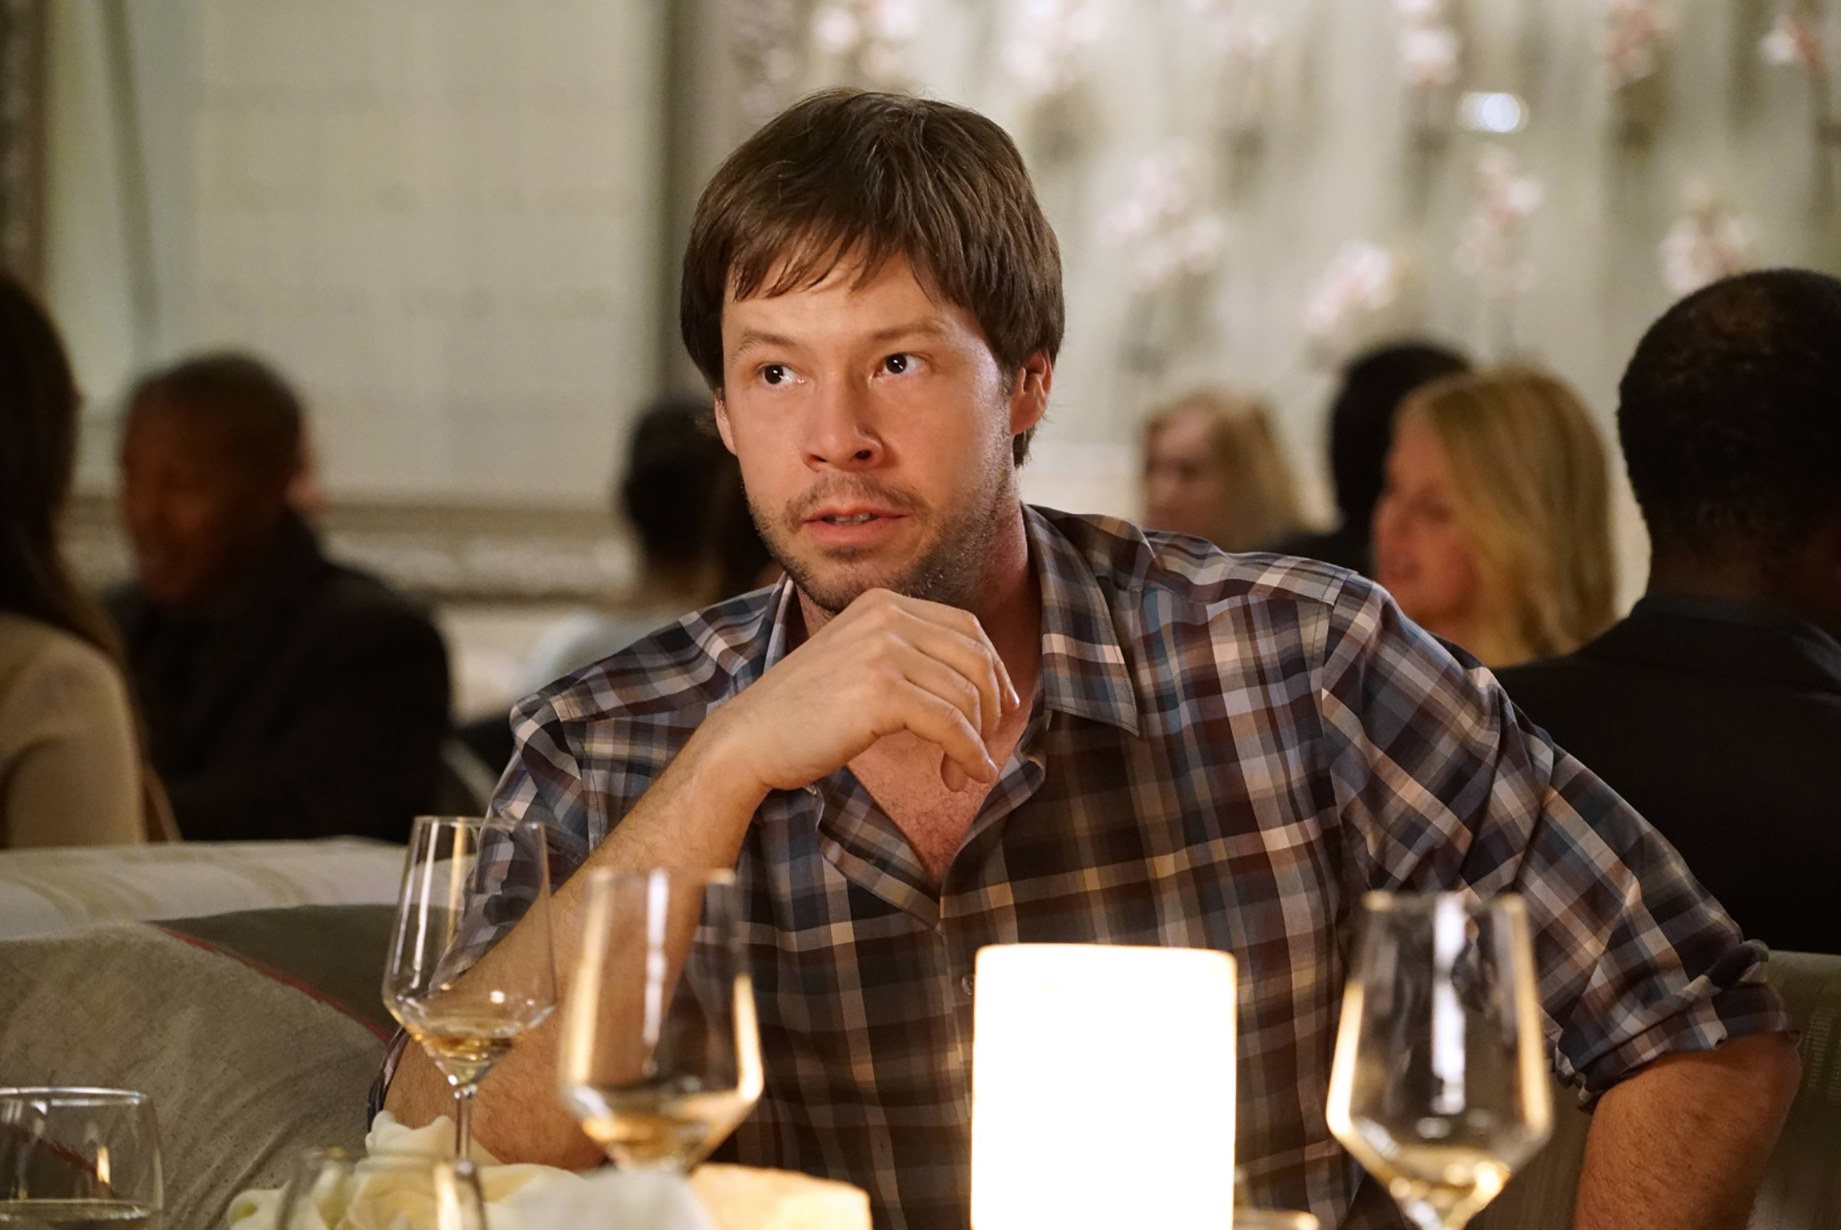 Ike Barinholtz as Morgan Tookers at a restaurant table